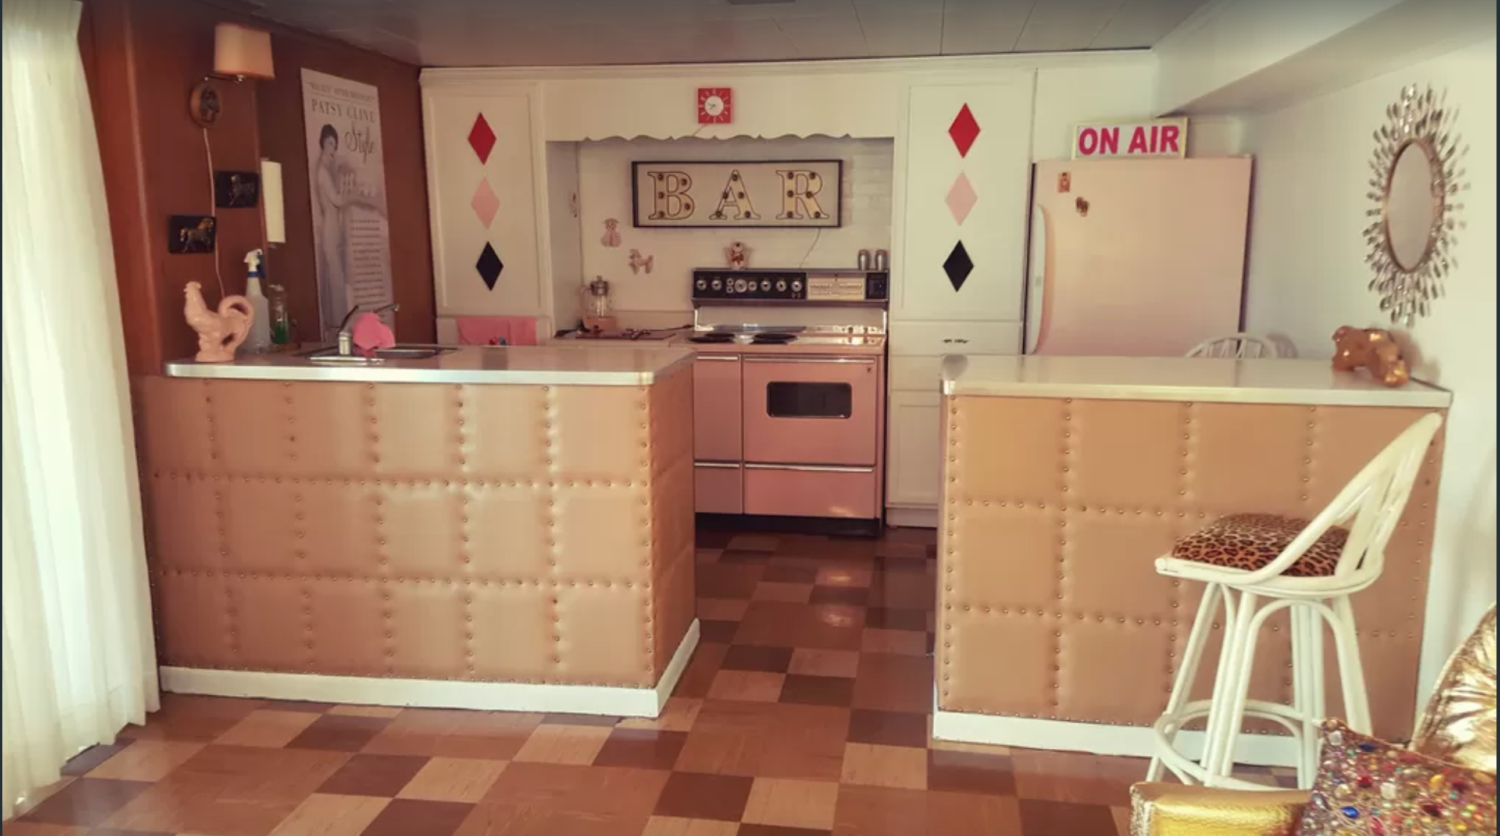 The dream kitchen of Patsy Cline